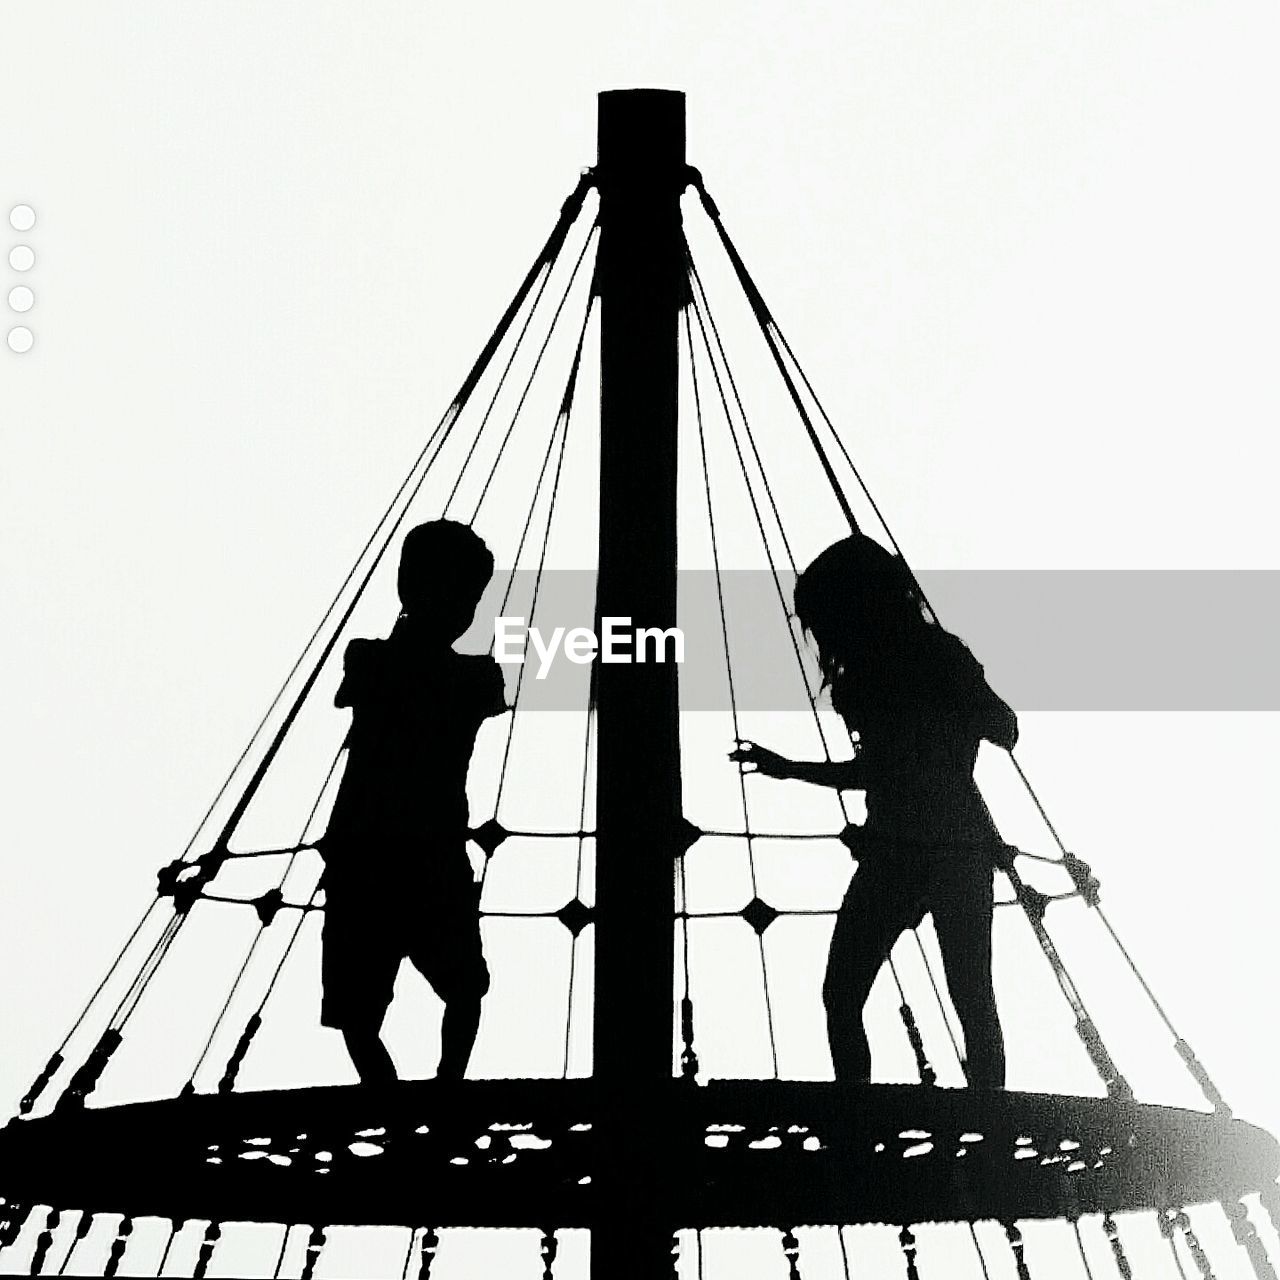 Two silhouette kids on ride against clear sky